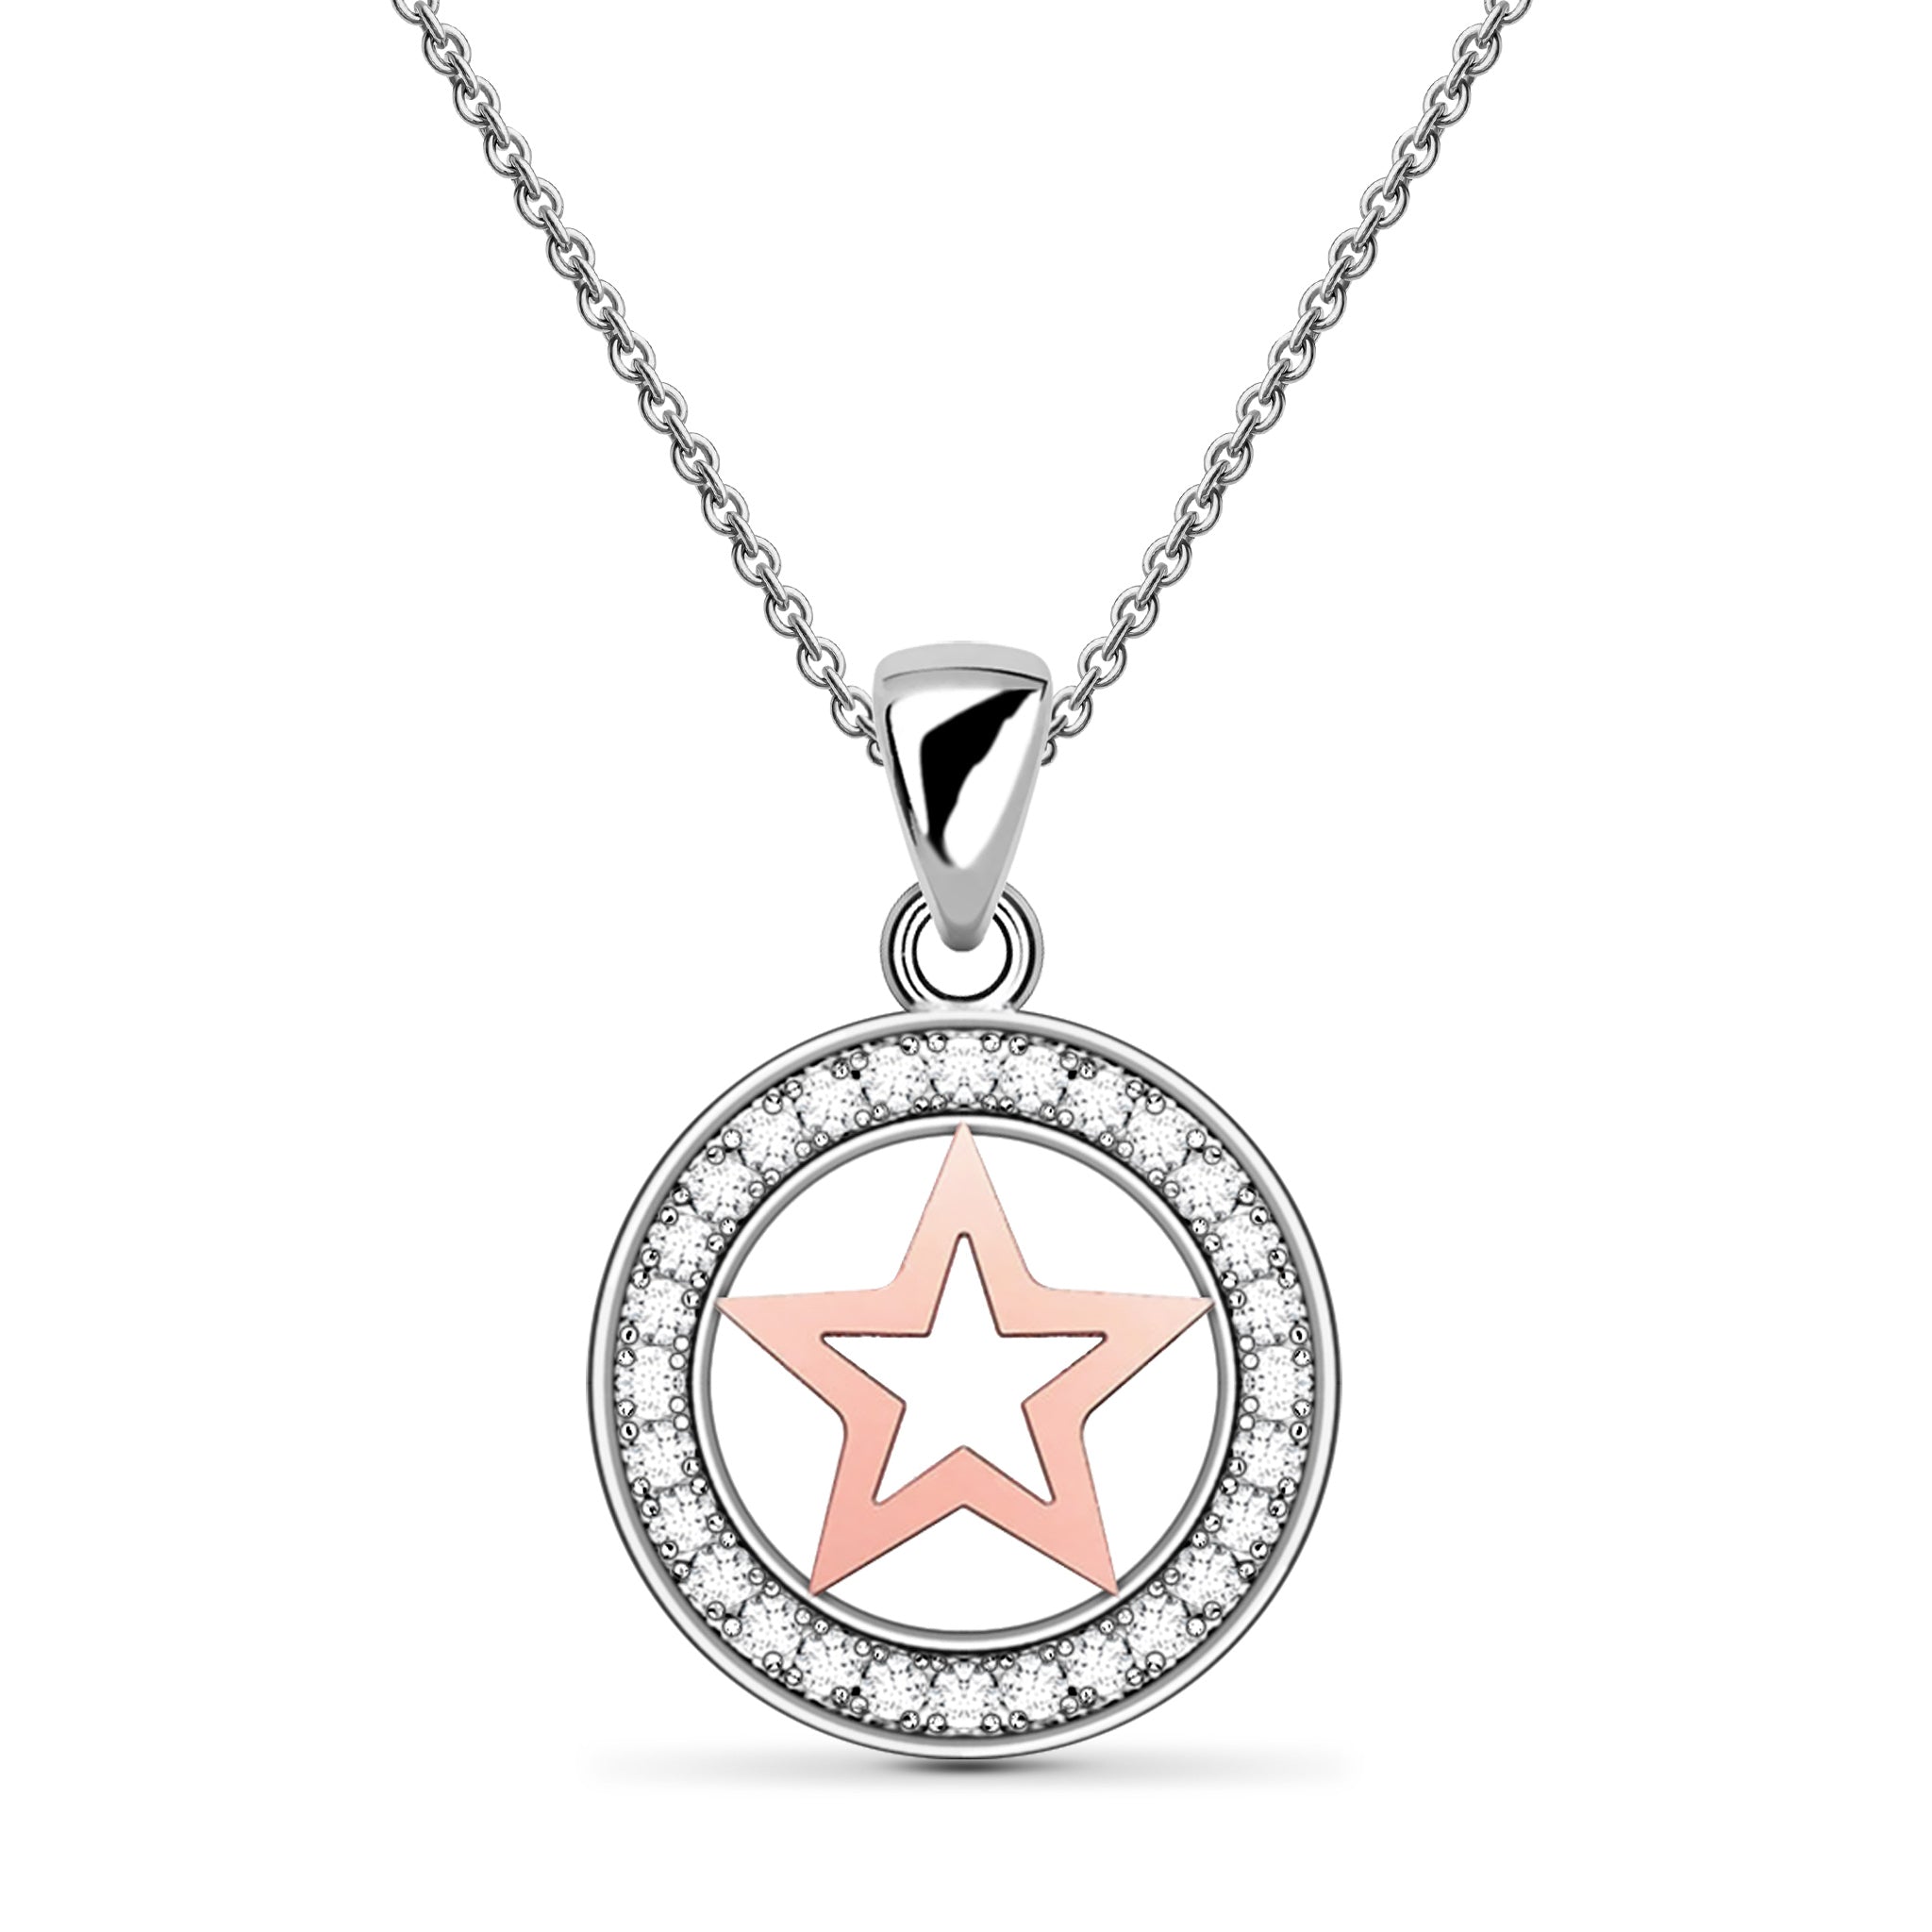 Circle of Stars Pretty White Zirconia Sterling Silver 2-Tones Necklace